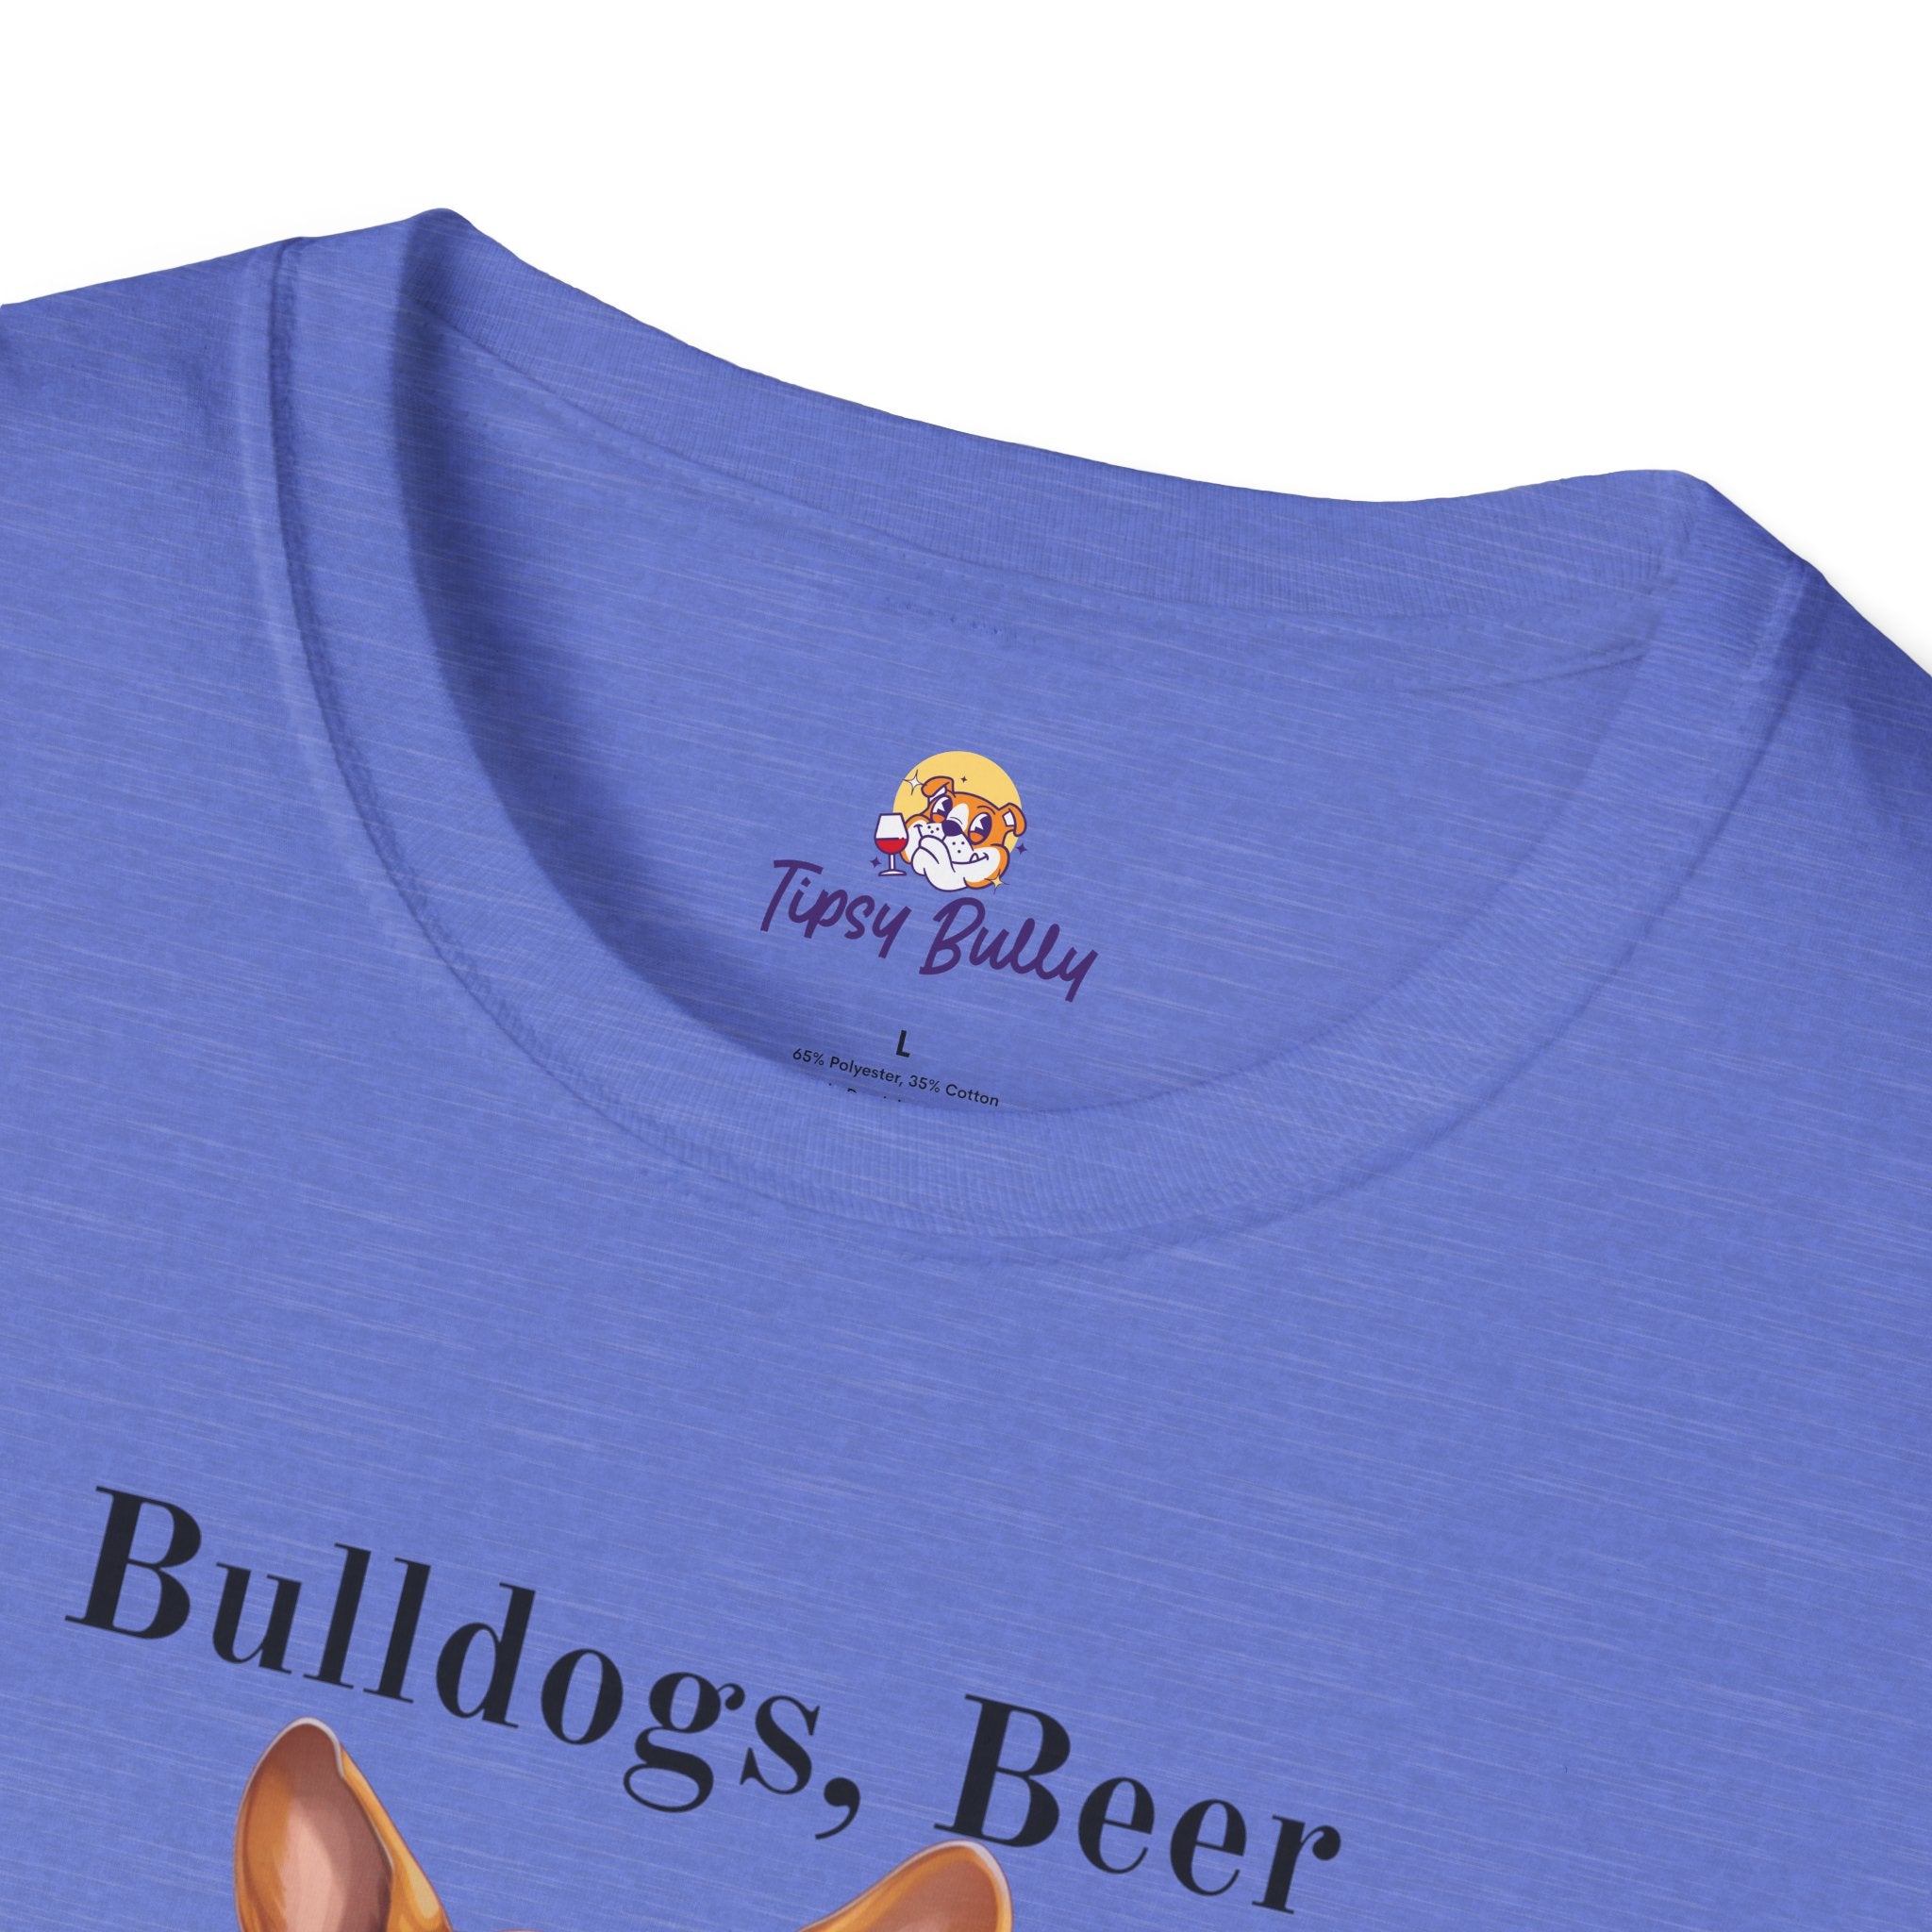 Bulldogs, Beer, and Bad Decisions" Unisex T-Shirt by Tipsy Bully (French/Brown)